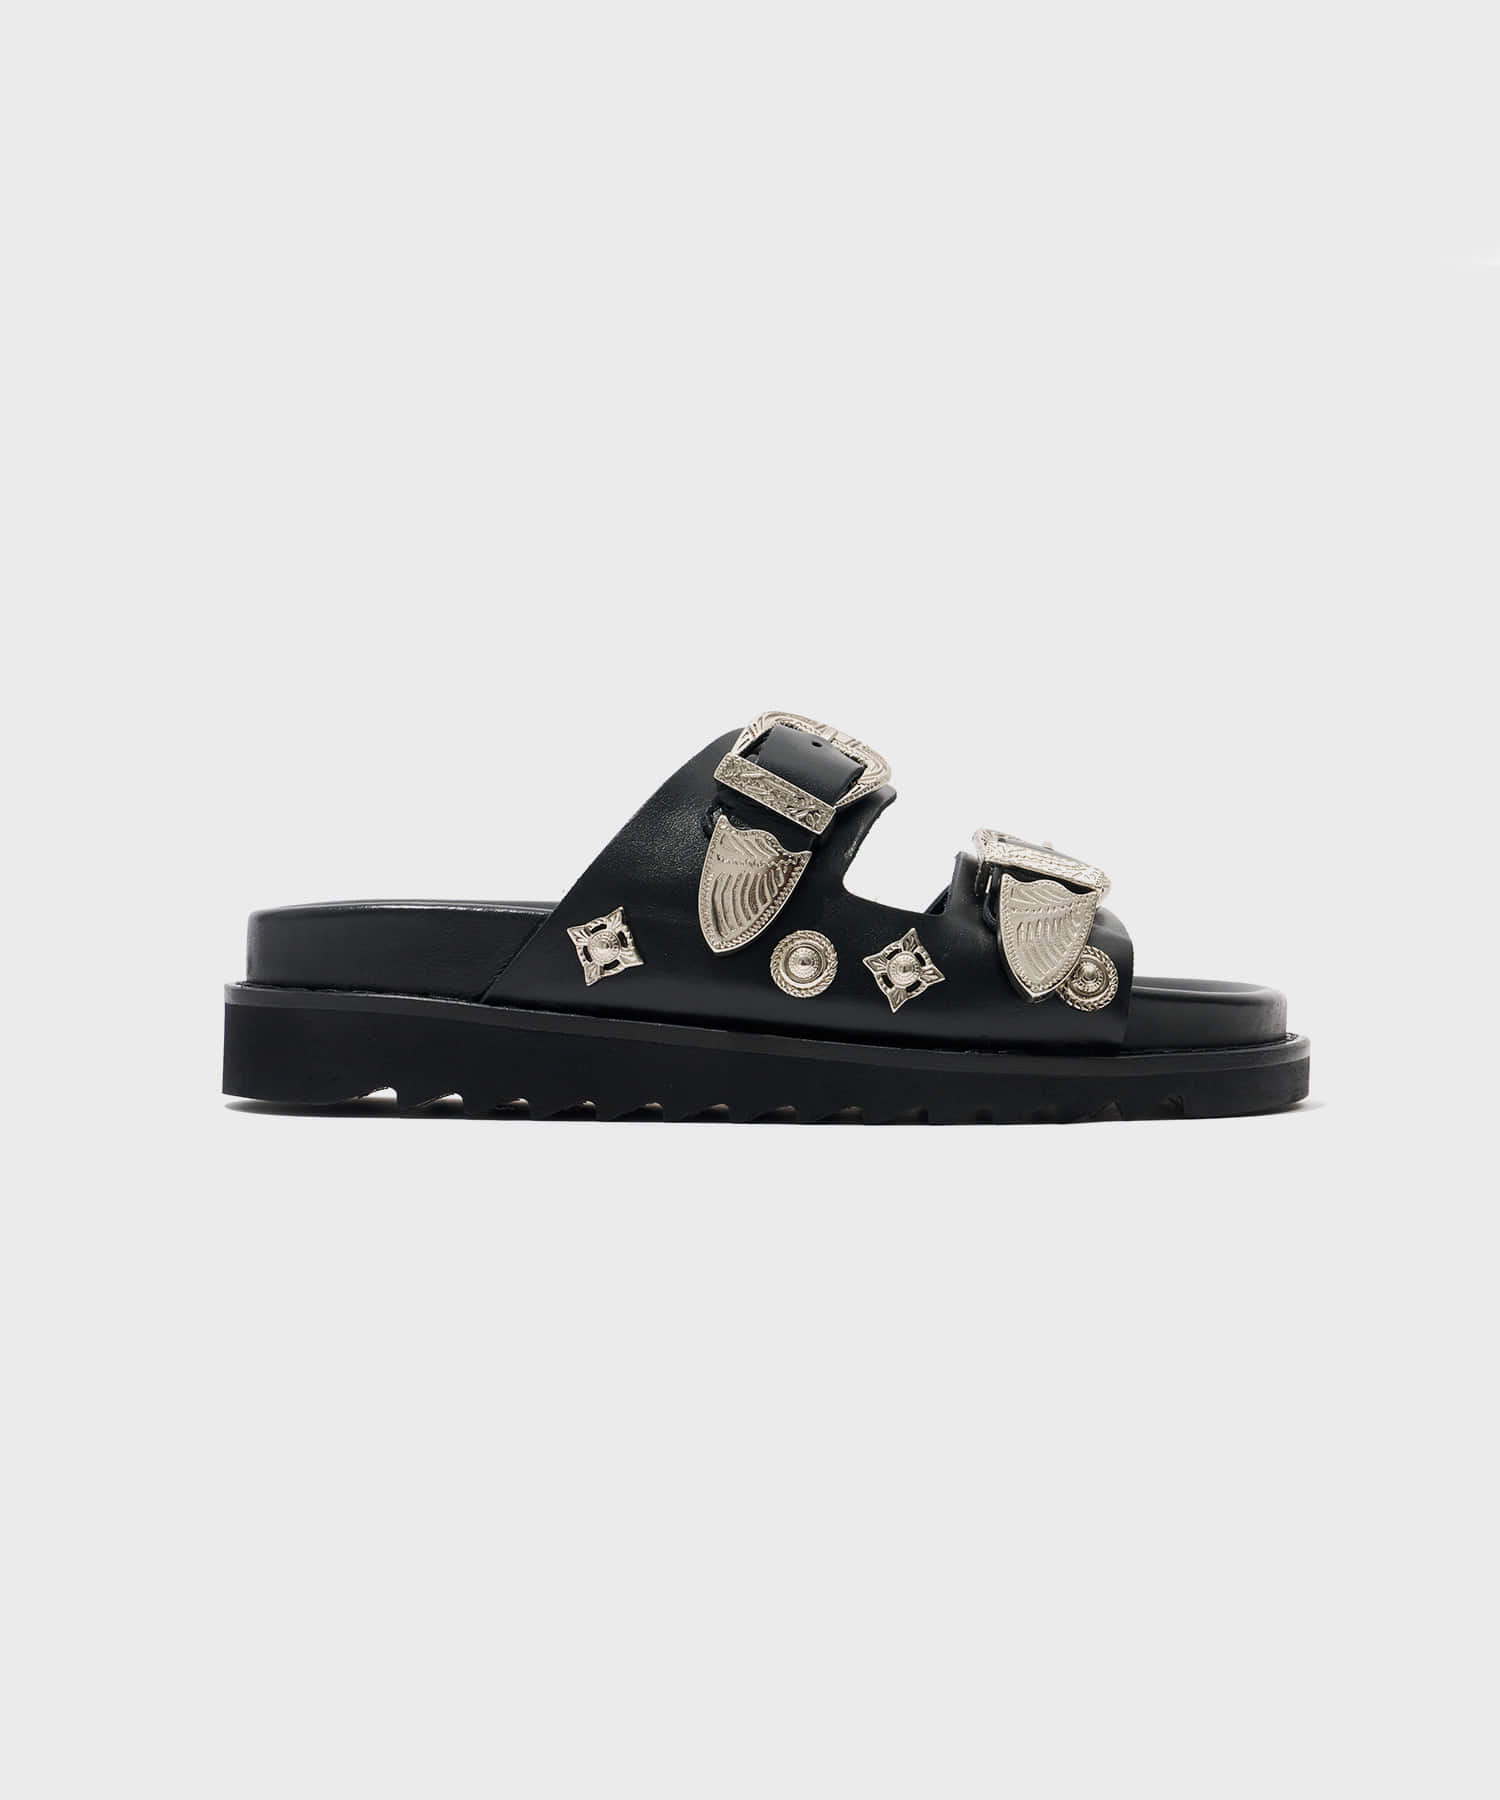 (w) Buckle Sandals (Black Leather)